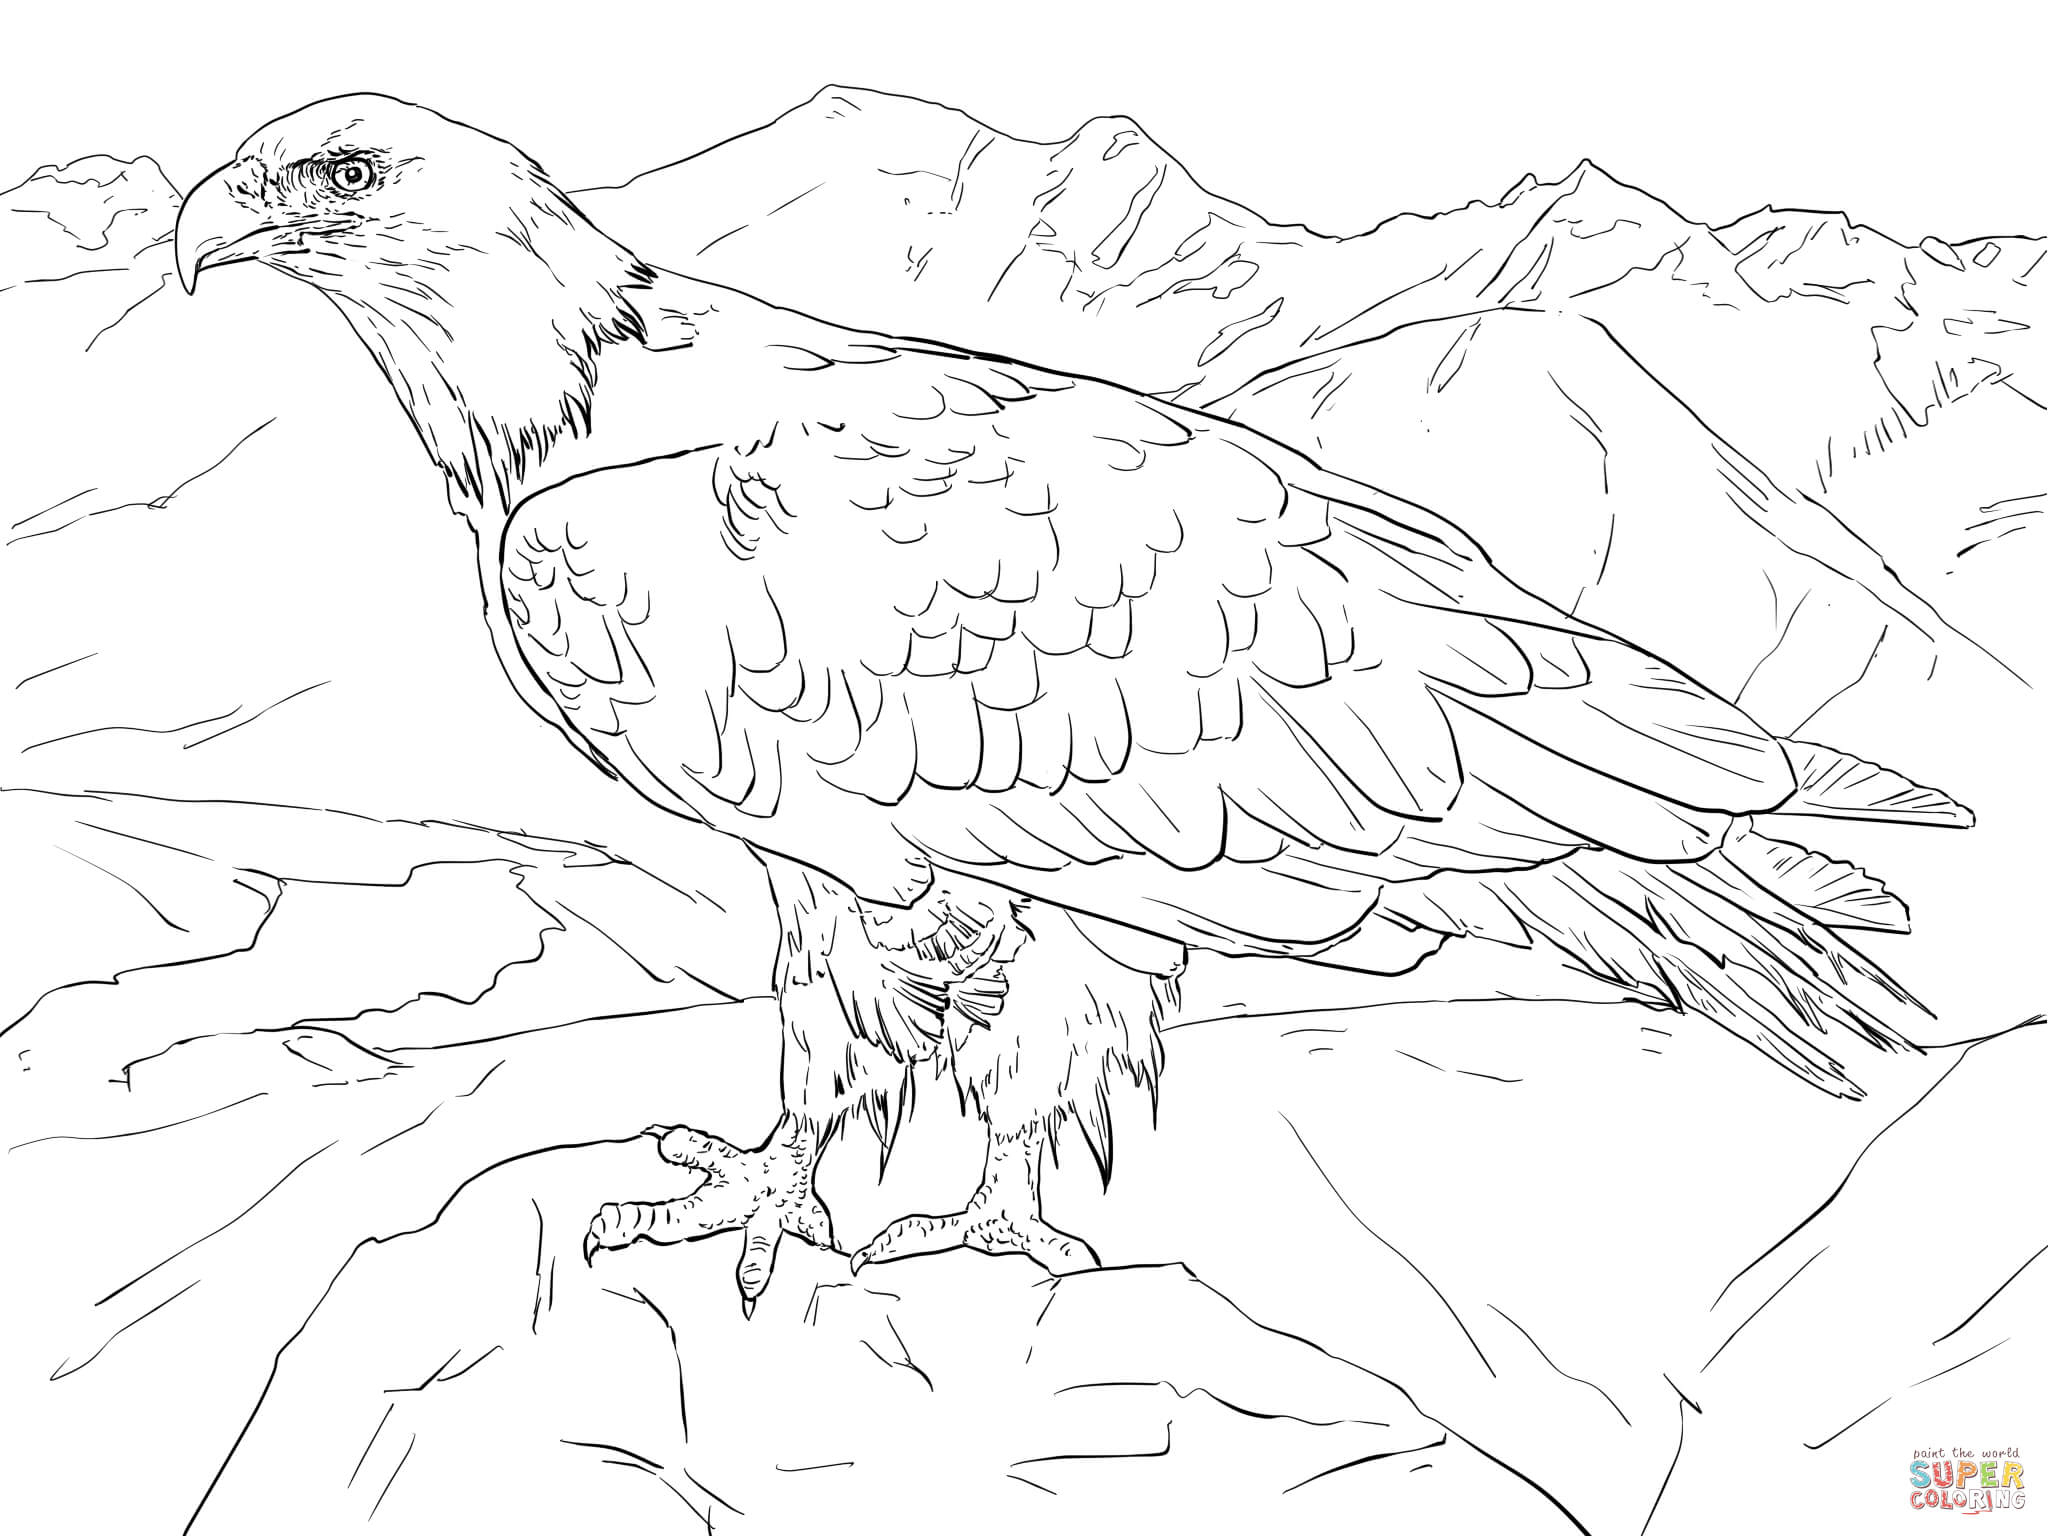 Bald Eagle From Alaska Coloring Page | Free Printable Coloring Pages - Free Printable Pictures Of Alaska